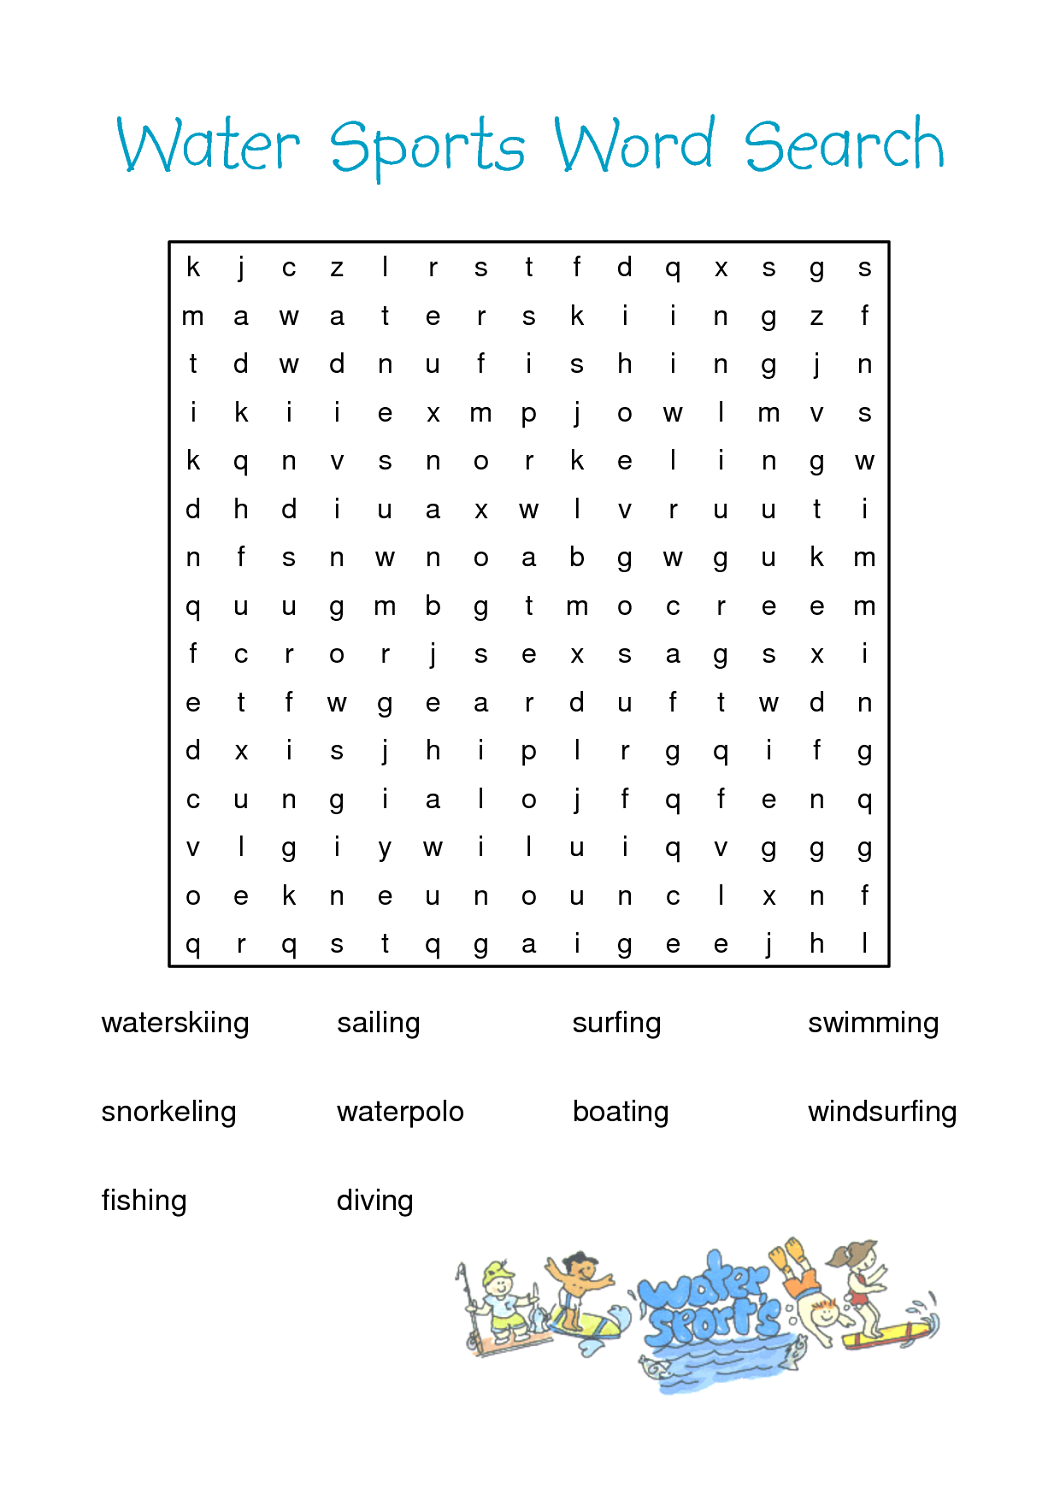 word-search-sports-water